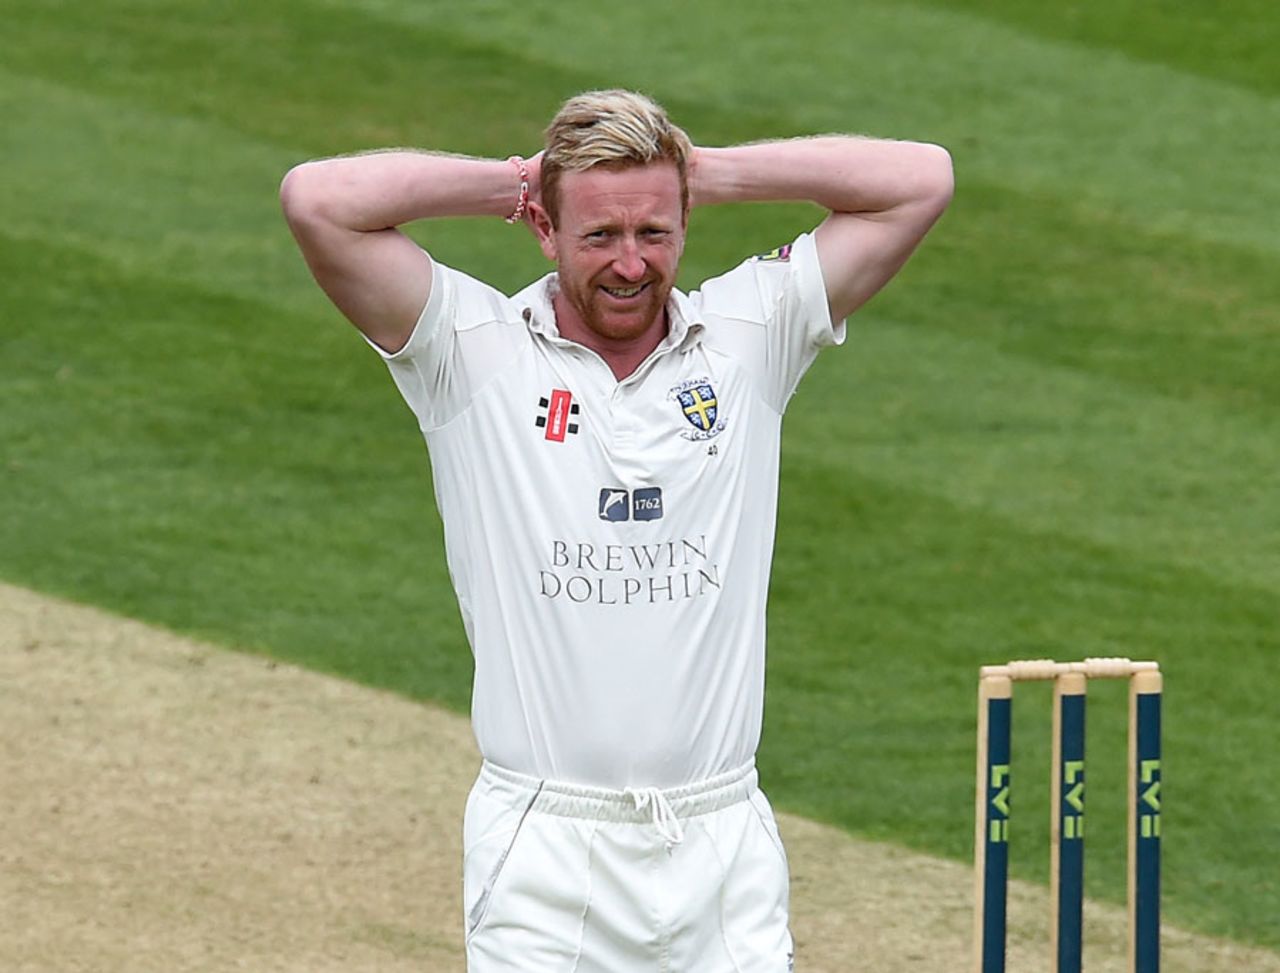 Paul Collingwood picked up three wickets to help finish Notts off, Durham v Nottinghamshire, County Championship, Division One, Chester-le-Street, September 1, 2014